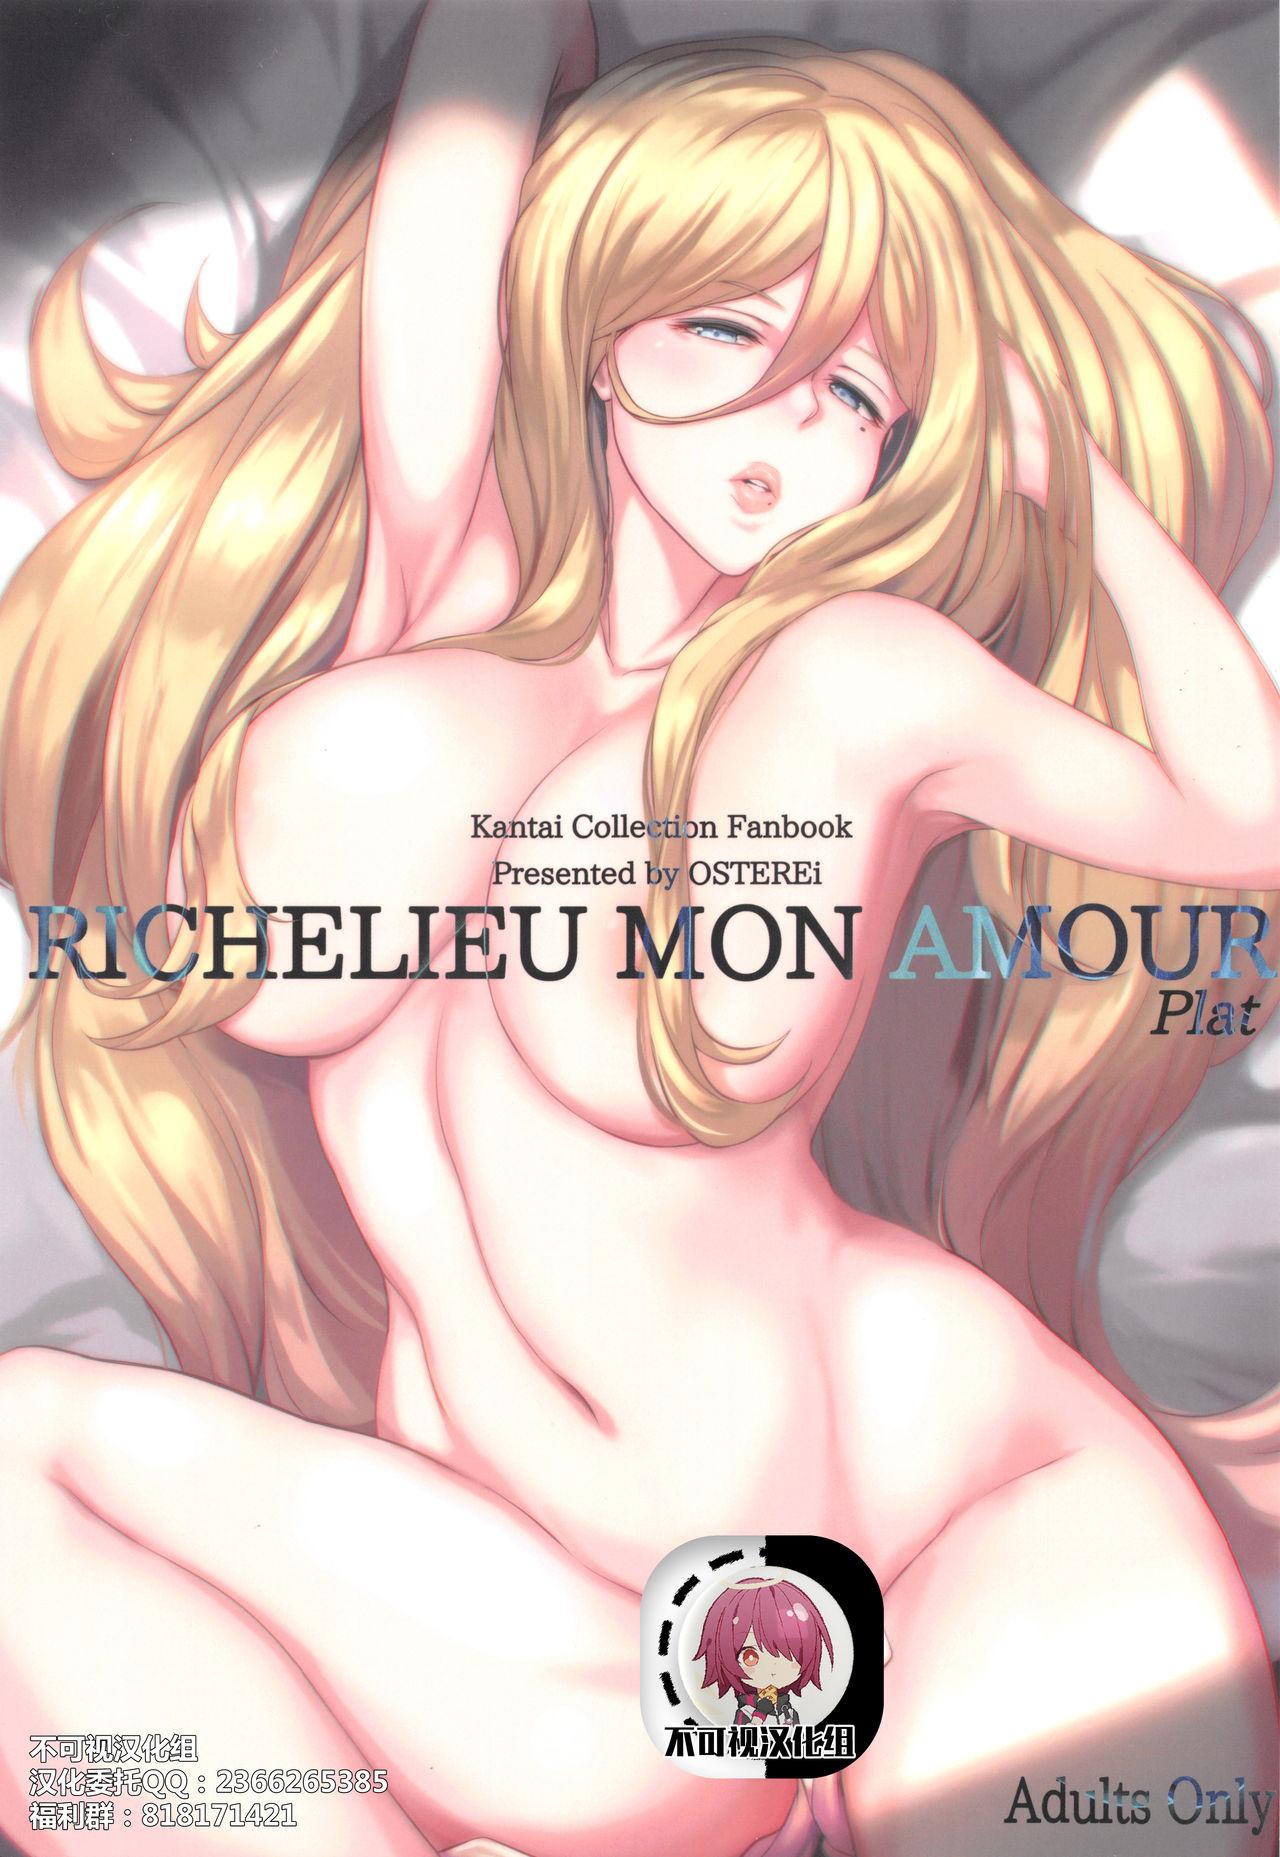 Spy Cam RICHELIEU MON AMOUR Plat - Kantai collection Oiled - Page 1